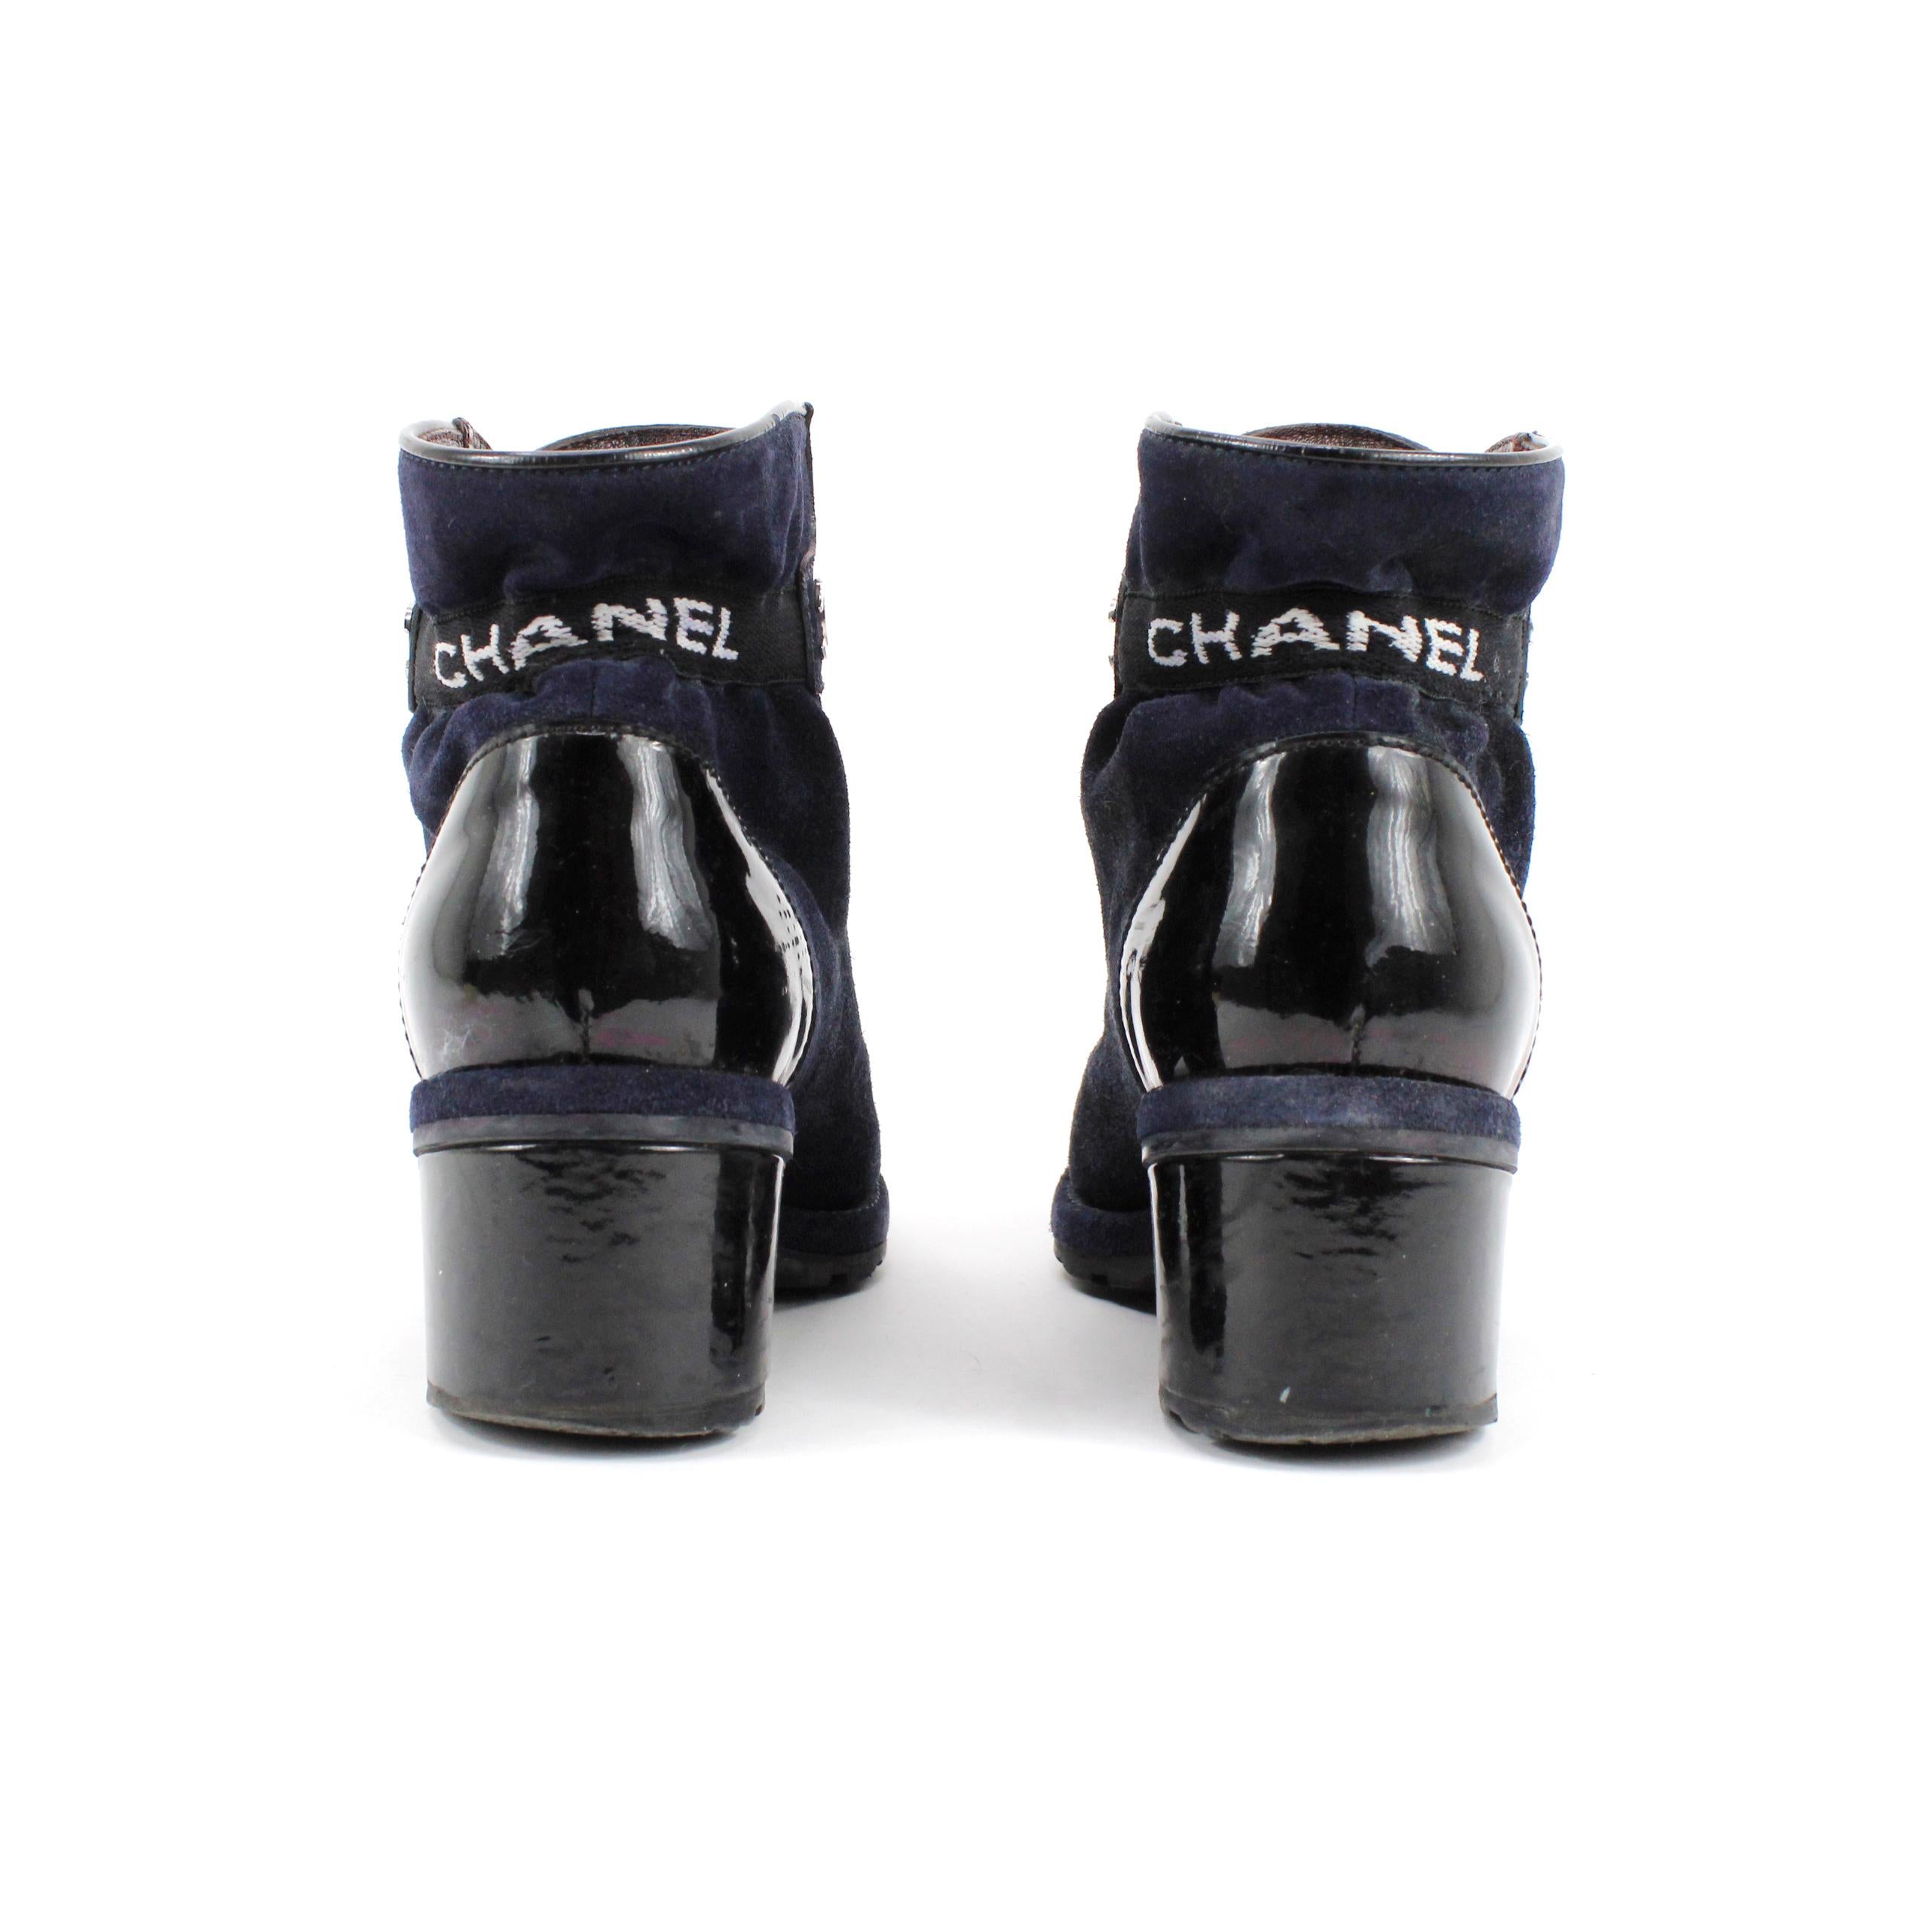 Chanel boots in sued leather + patent leather, color blue and black. Size 37,5 EU.

Condition: 
Really good, slight scratches on the patent leather.